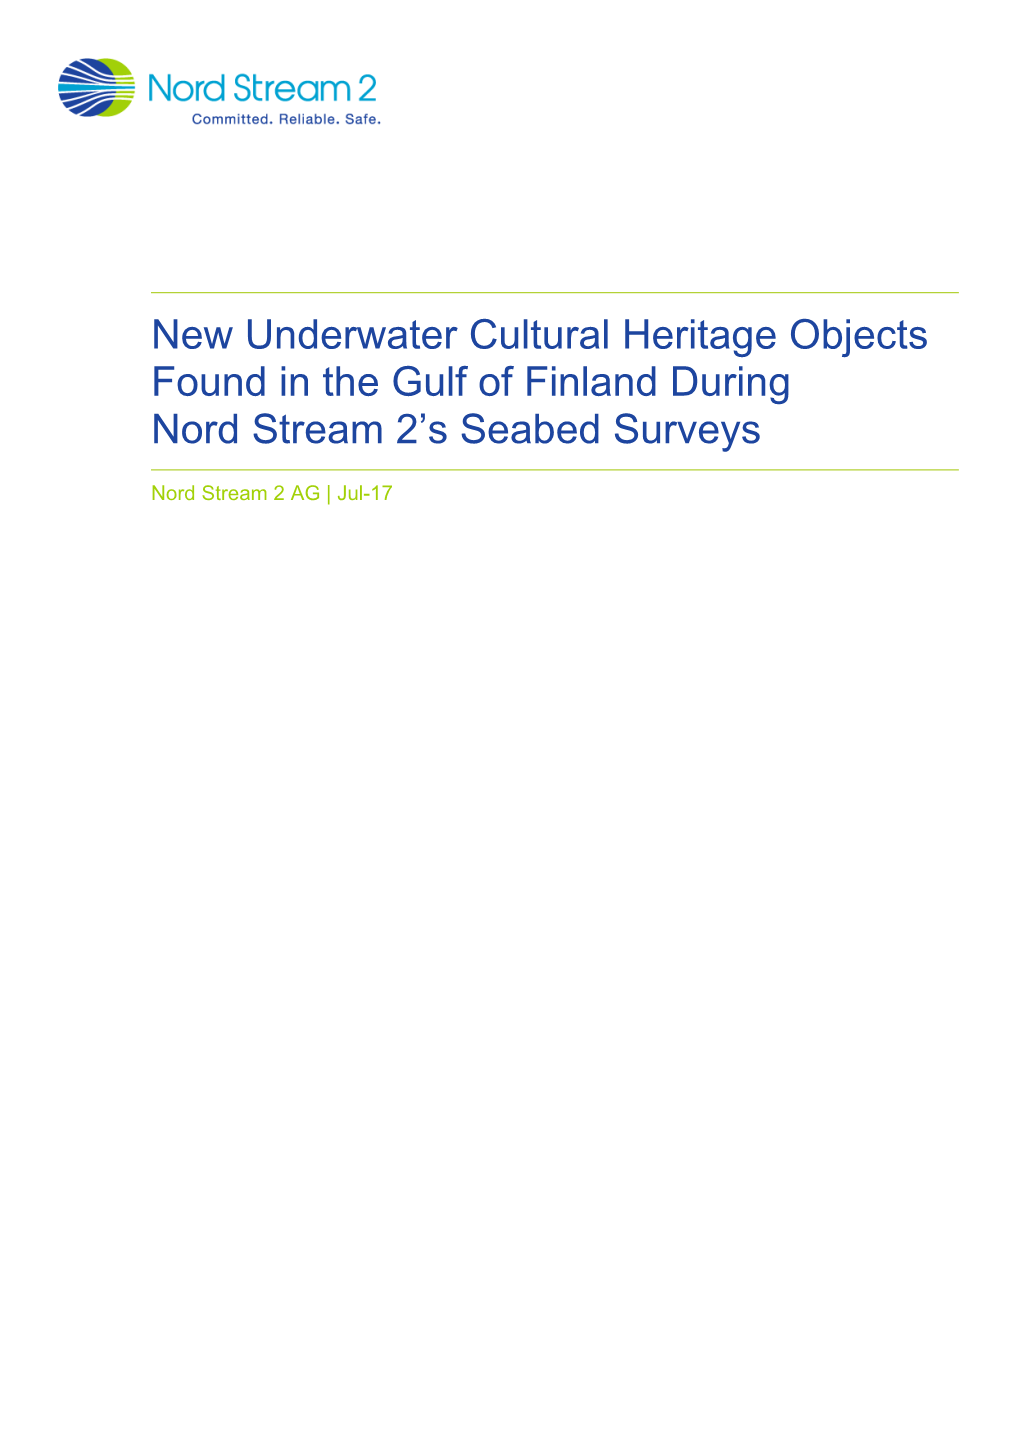 New Underwater Cultural Heritage Objects Found in the Gulf of Finland During Nord Stream 2’S Seabed Surveys